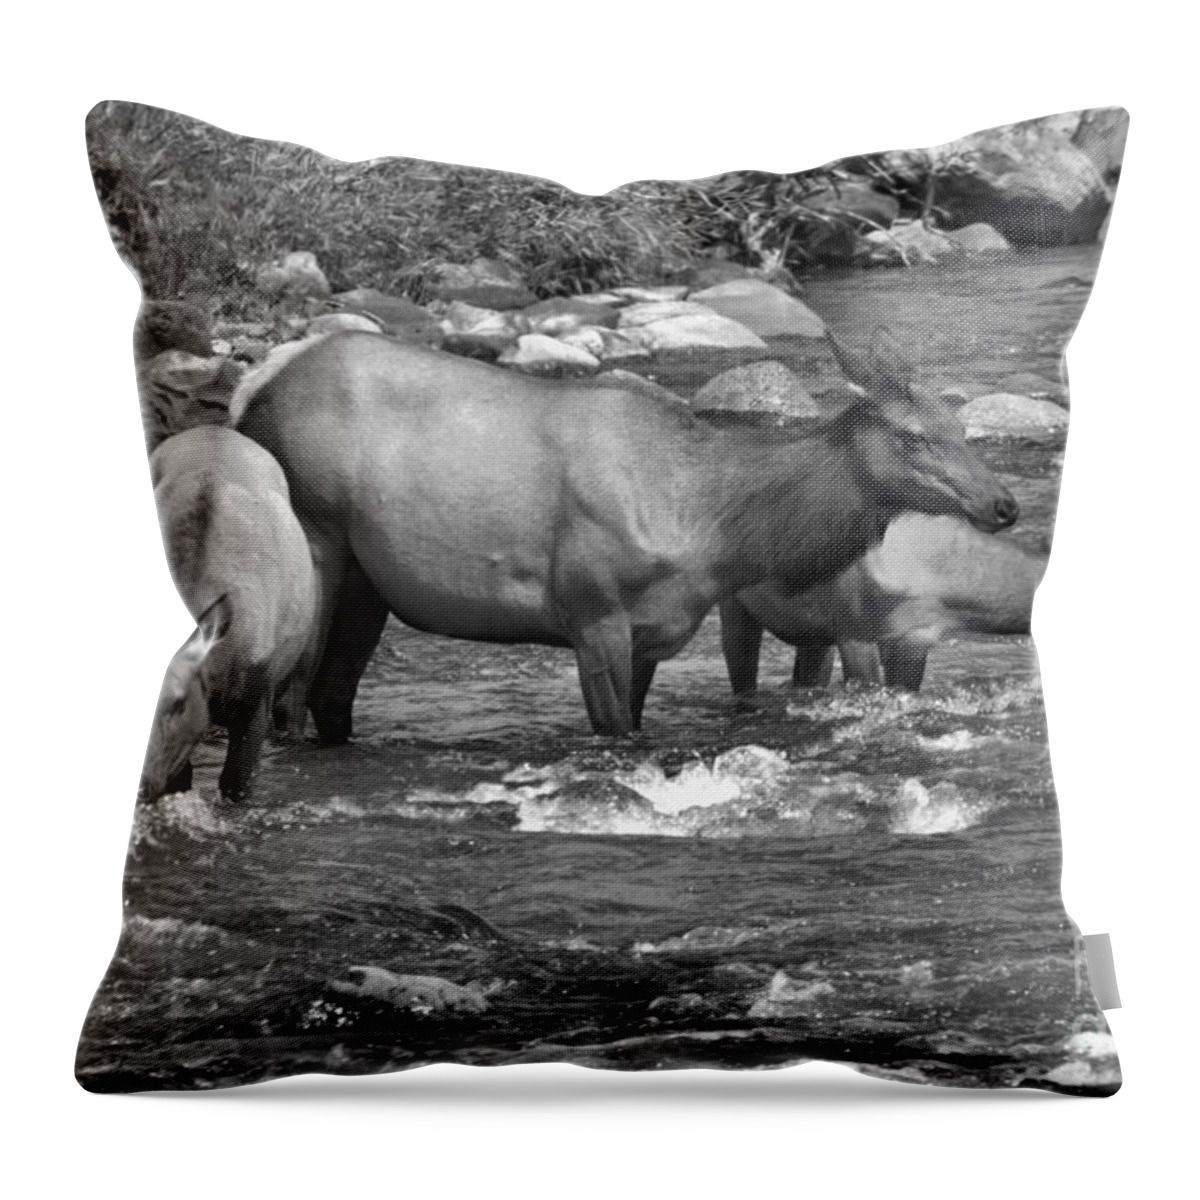 Elk Throw Pillow featuring the photograph Standing In The Gardiner River Black And White by Adam Jewell